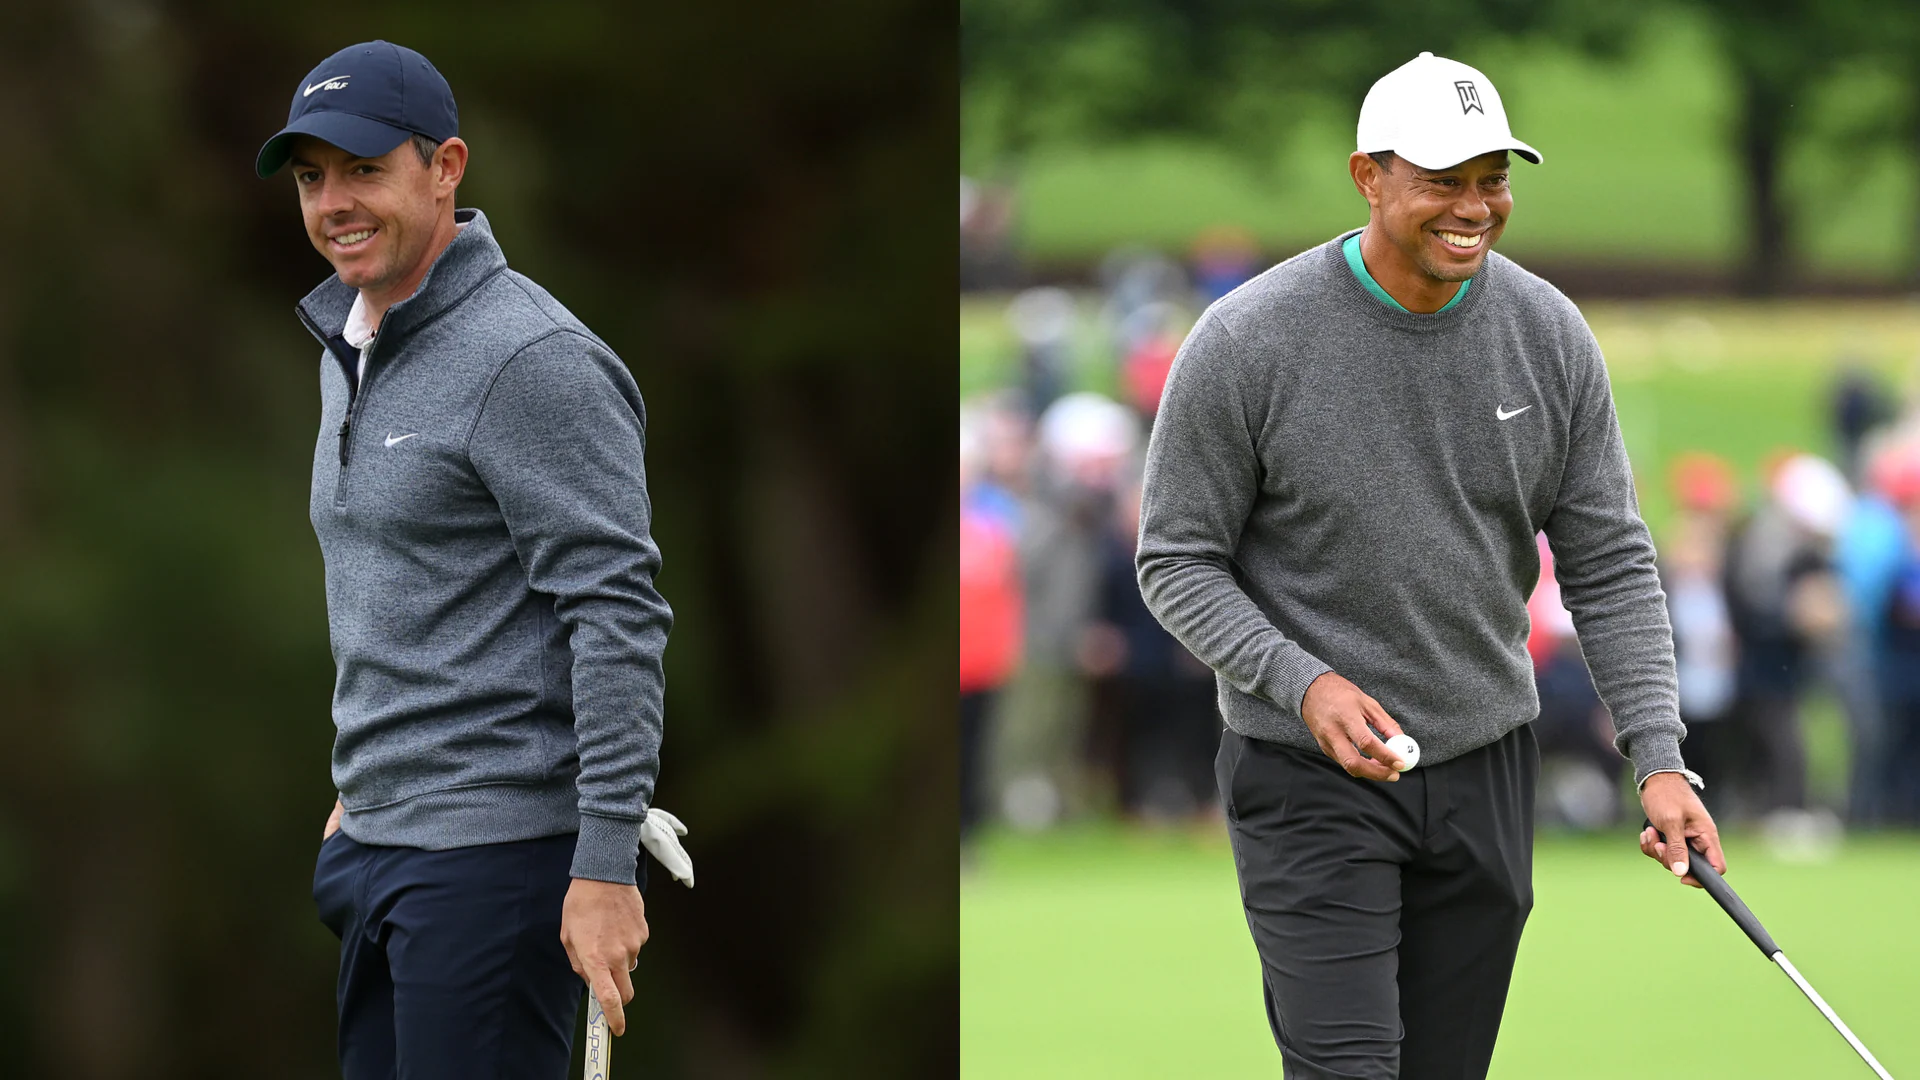 Tiger Woods and Rory McIlroy play Ballybunion together in preparation for The Open